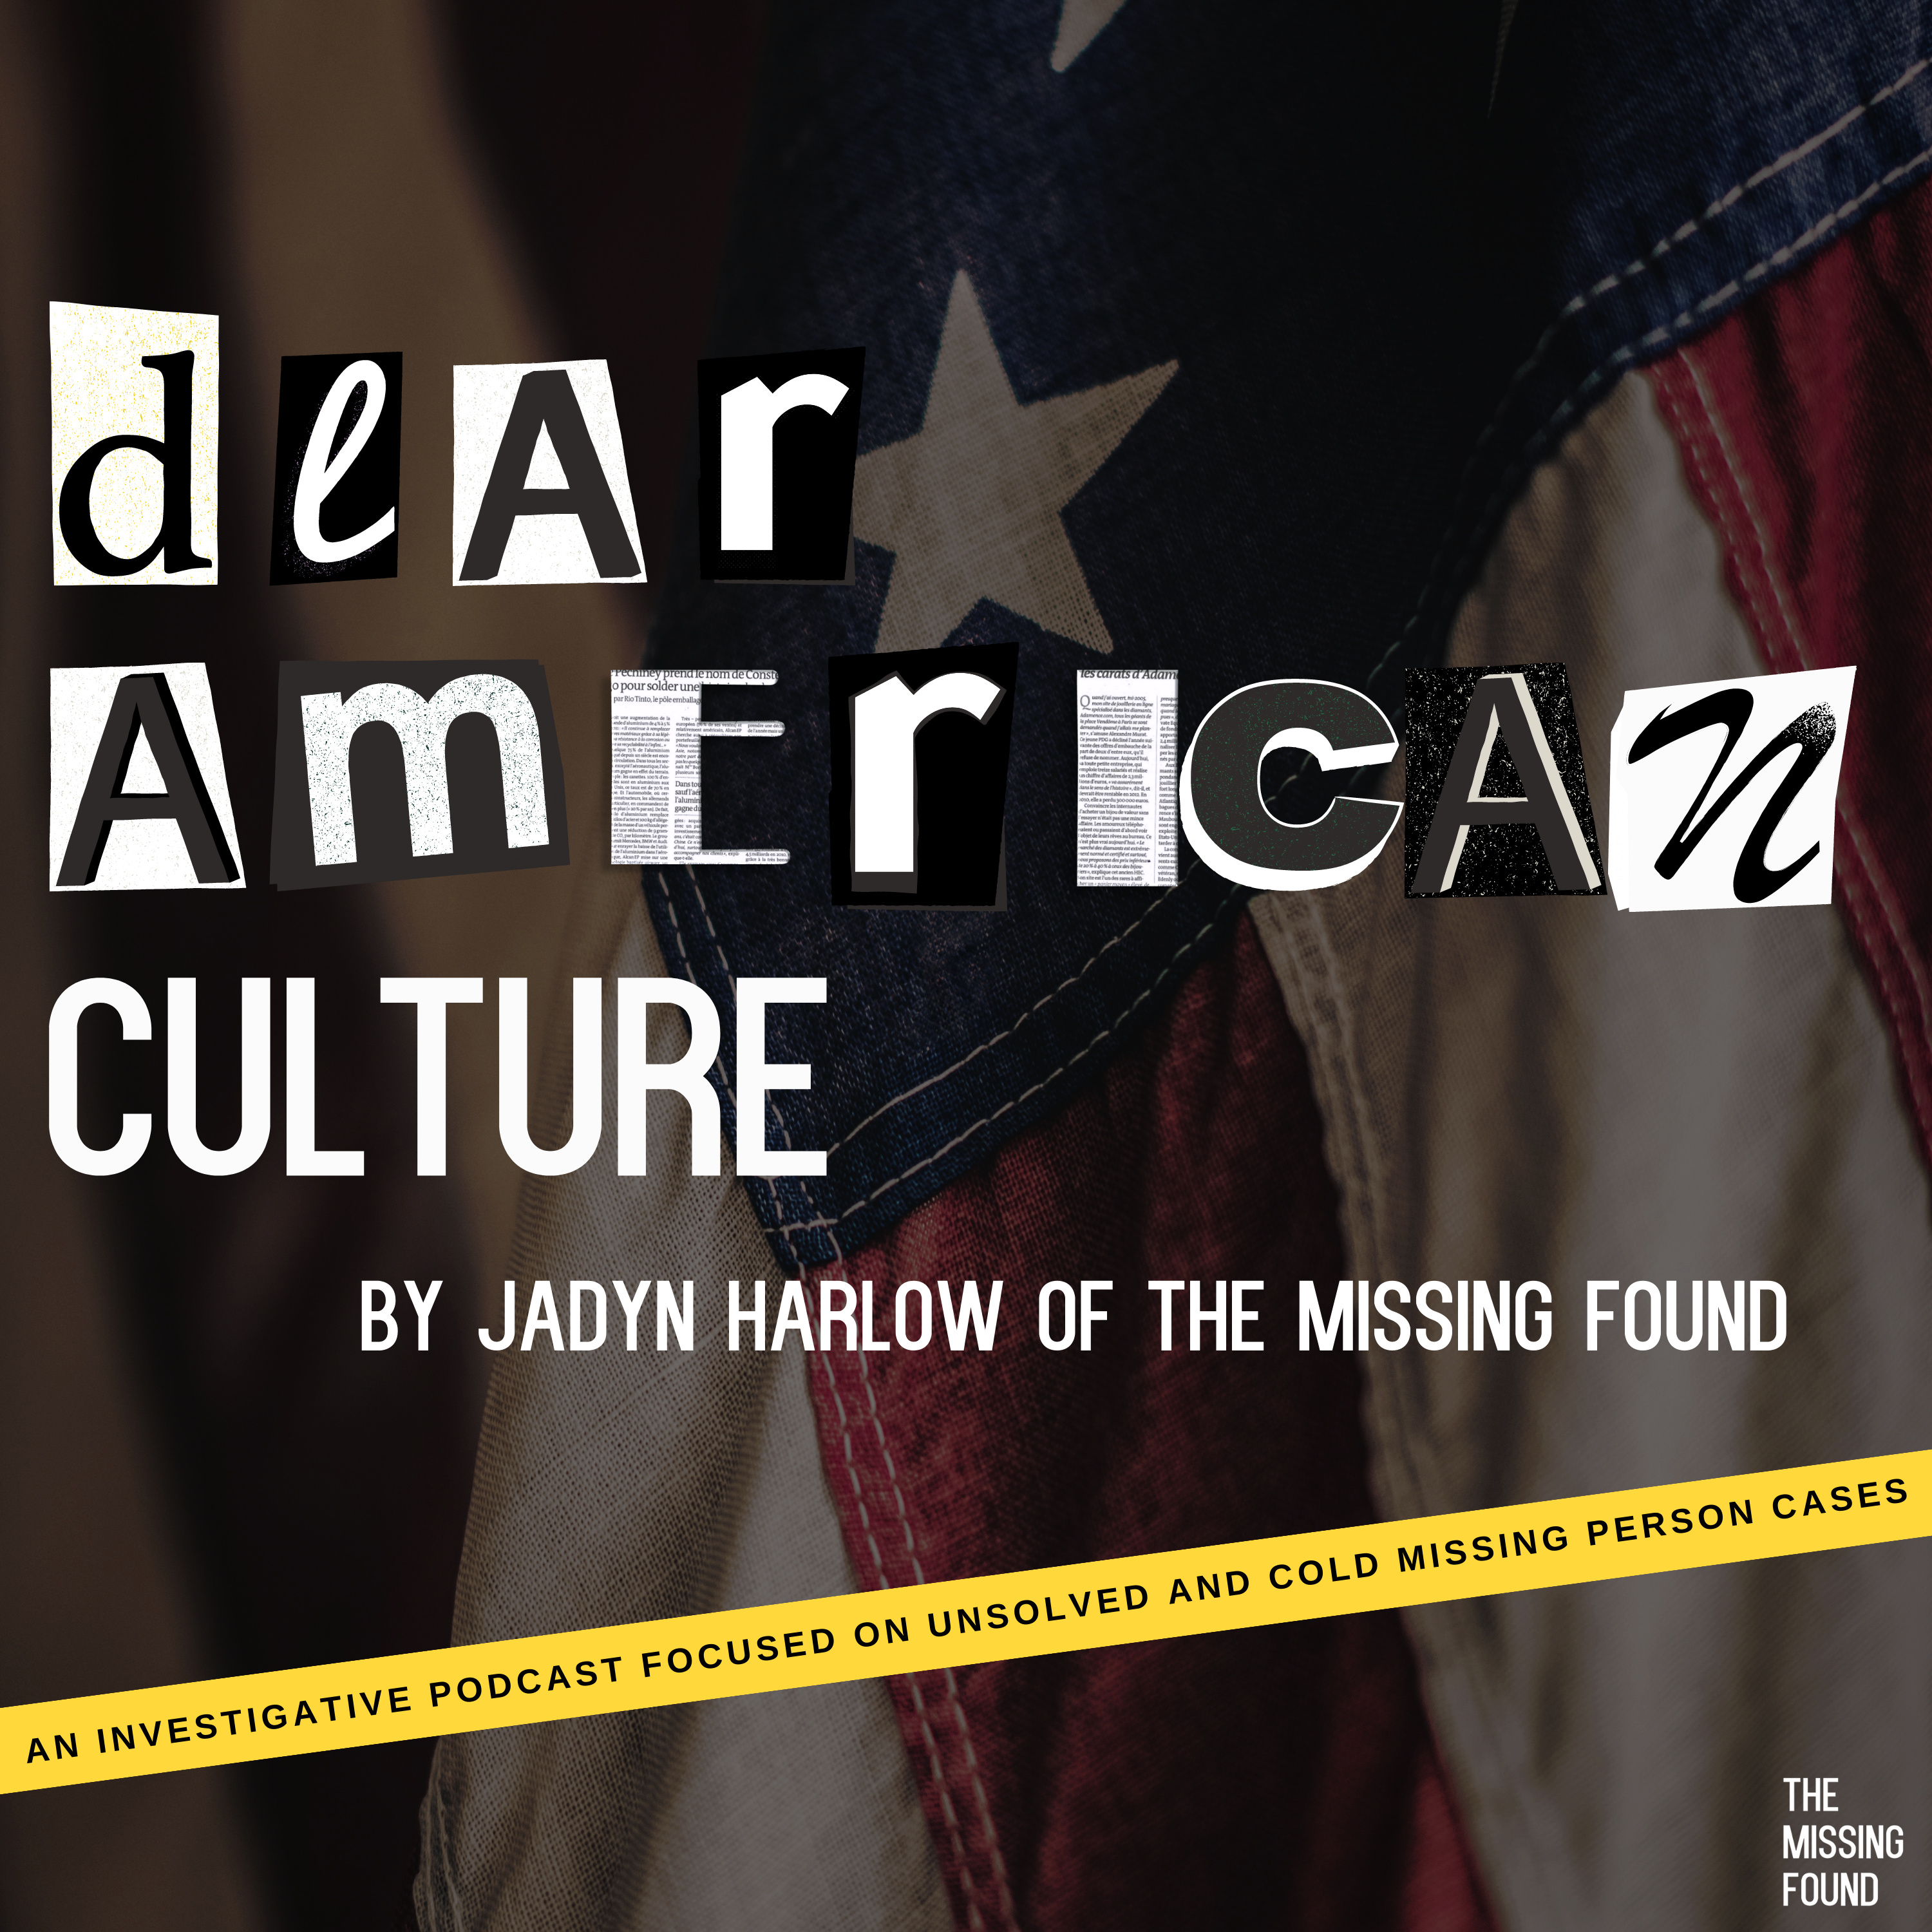 Dear, American Culture: The Glamourization and Obsession with Murder, Missing People, and Tragedy